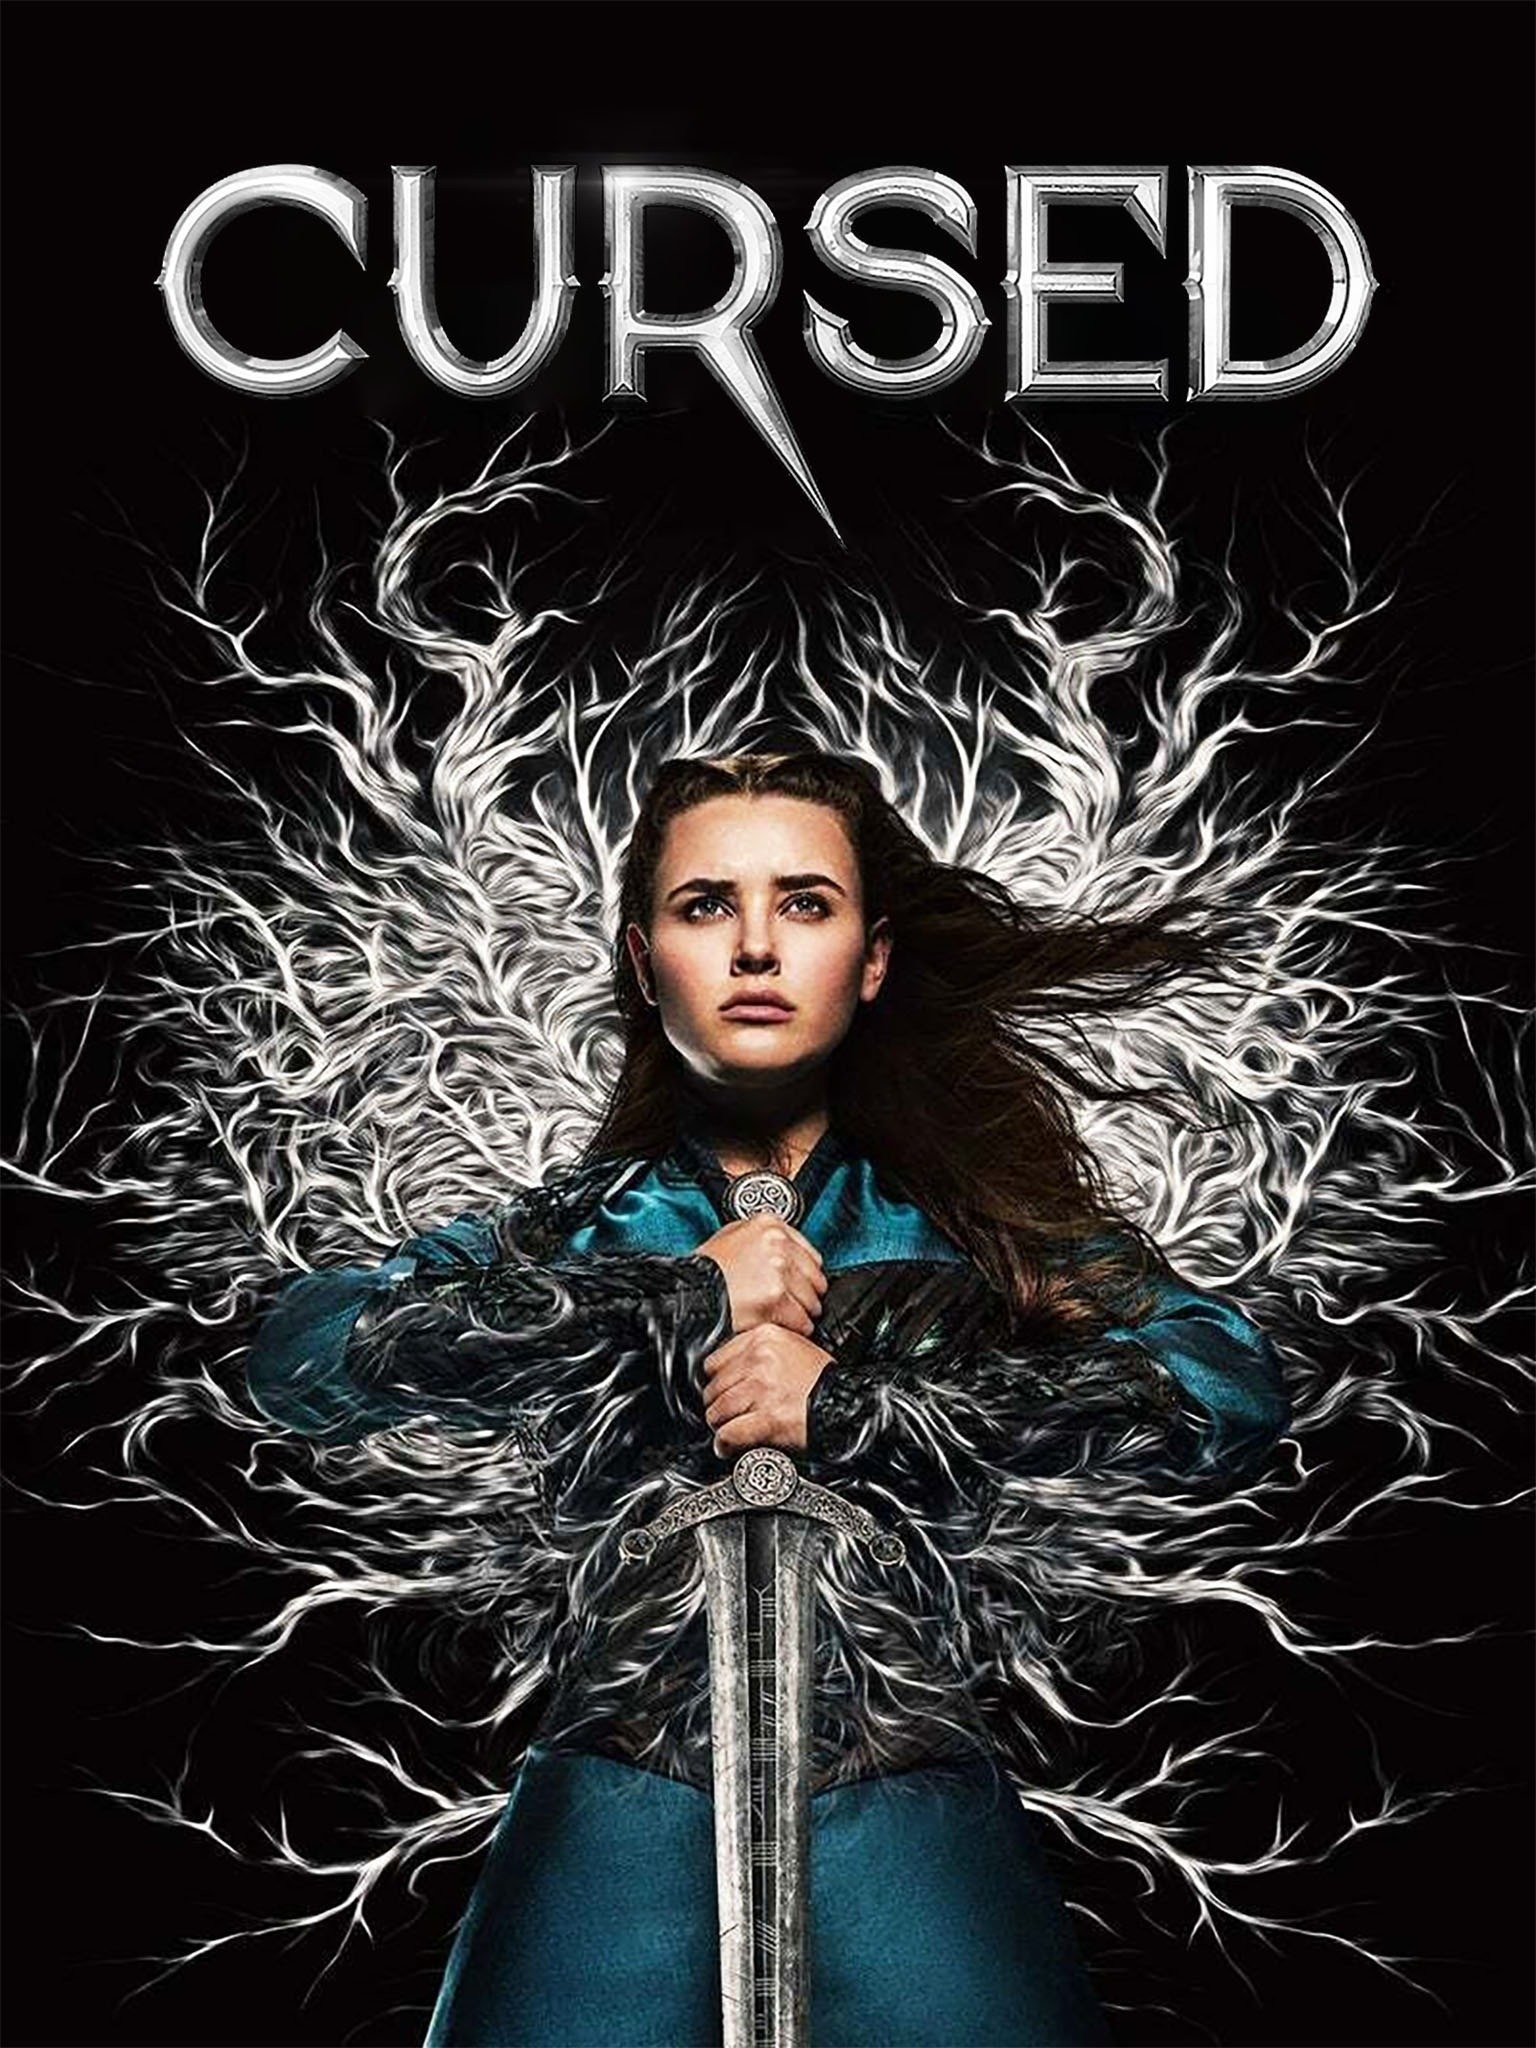 Series Review: Cursed – Raider Release